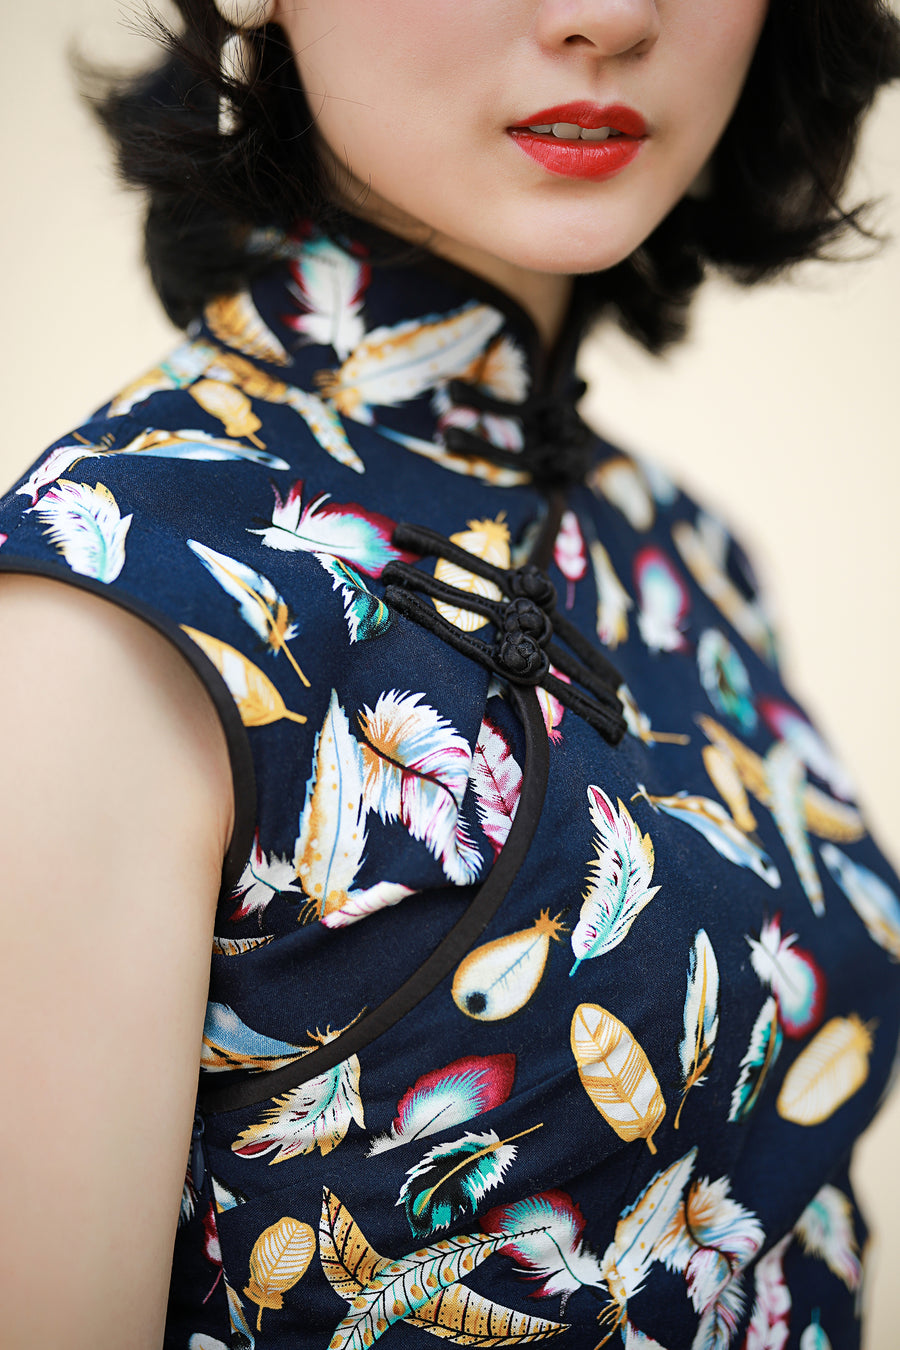 The Fun Cotton Sleeveless Qipao - Navy and Feathers